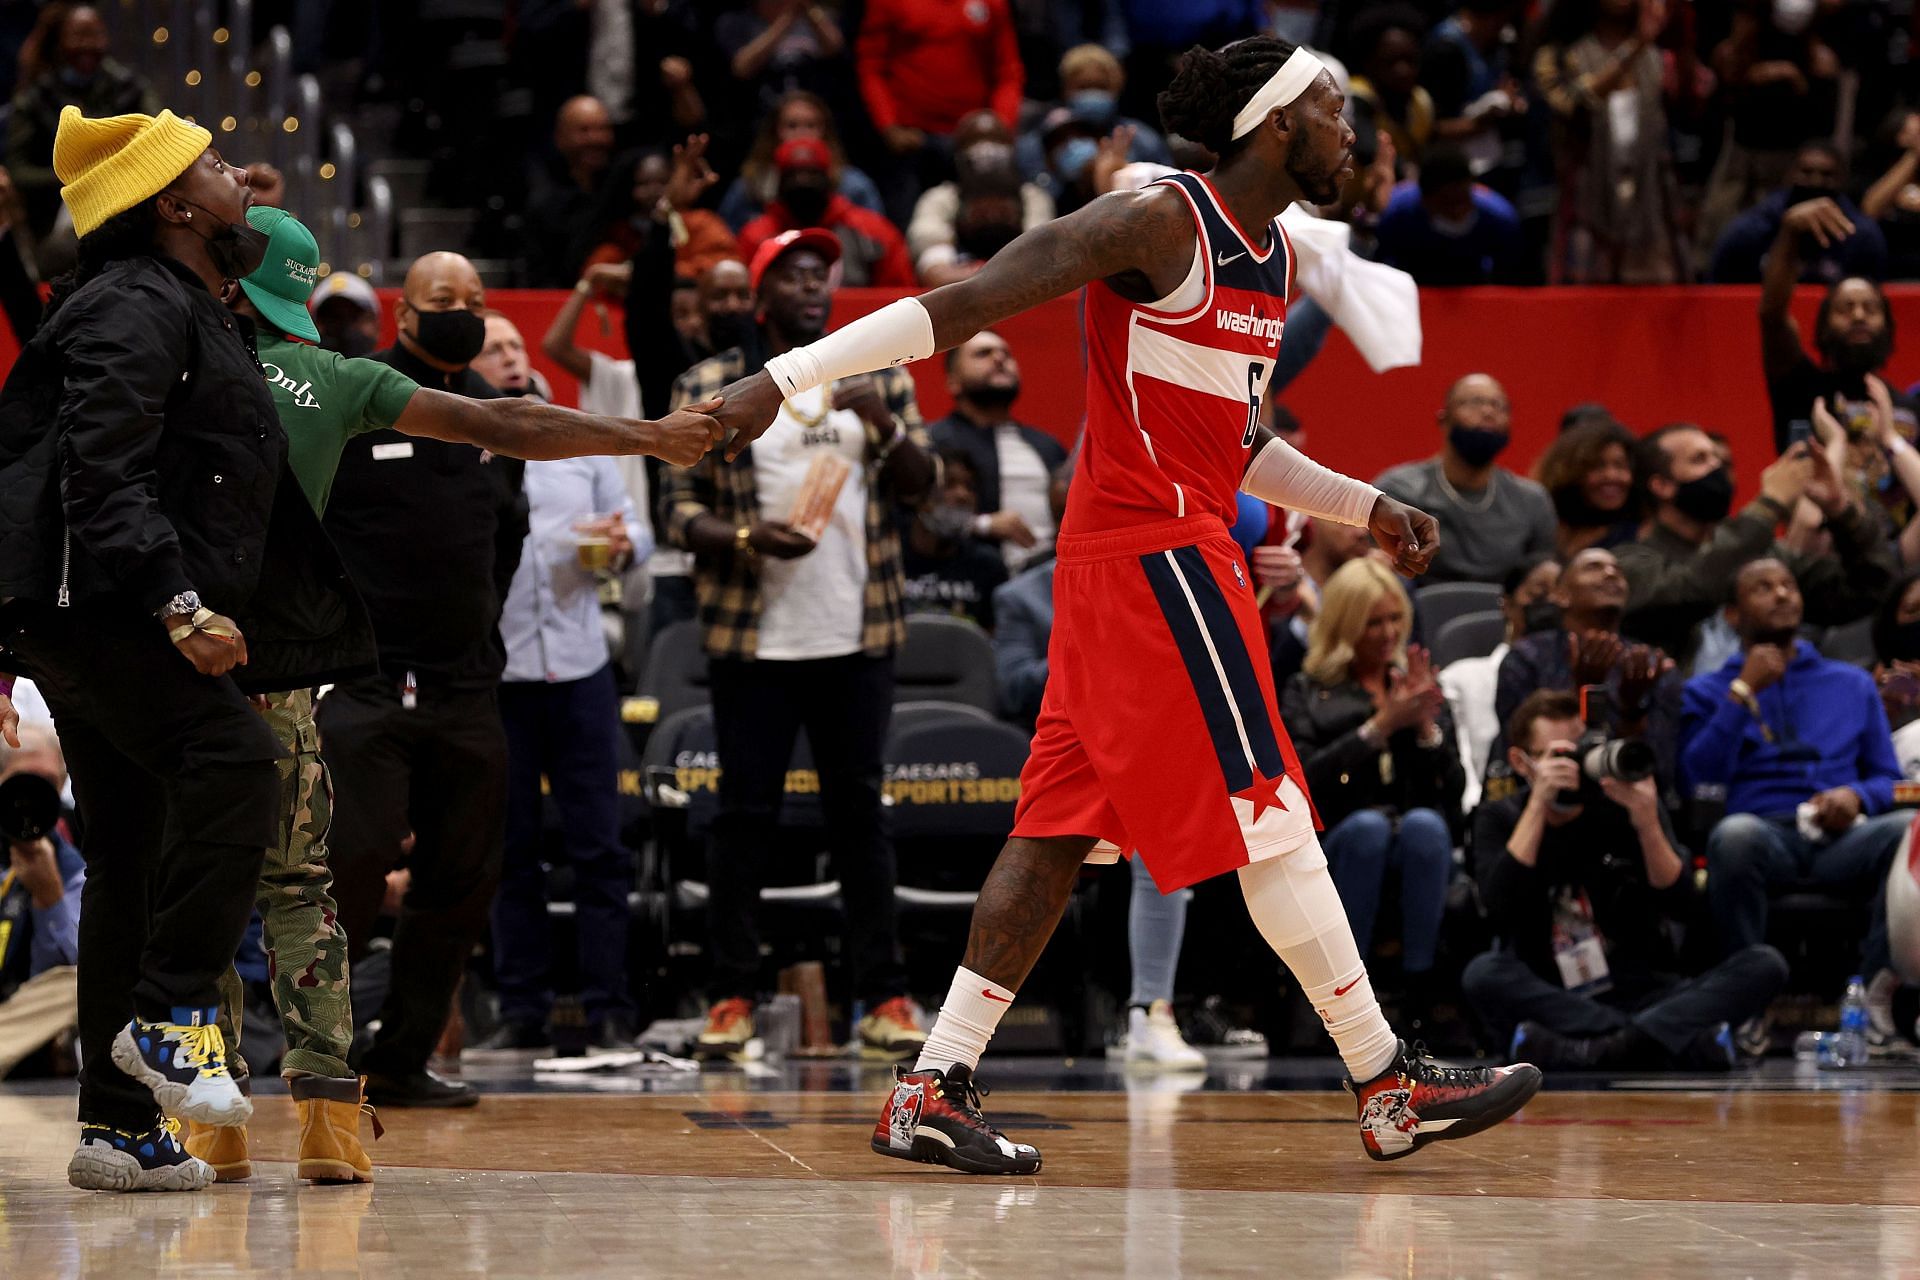 The Washington Wizards inflicted a 135-134 loss upon the Indiana Pacers in their most recent league game